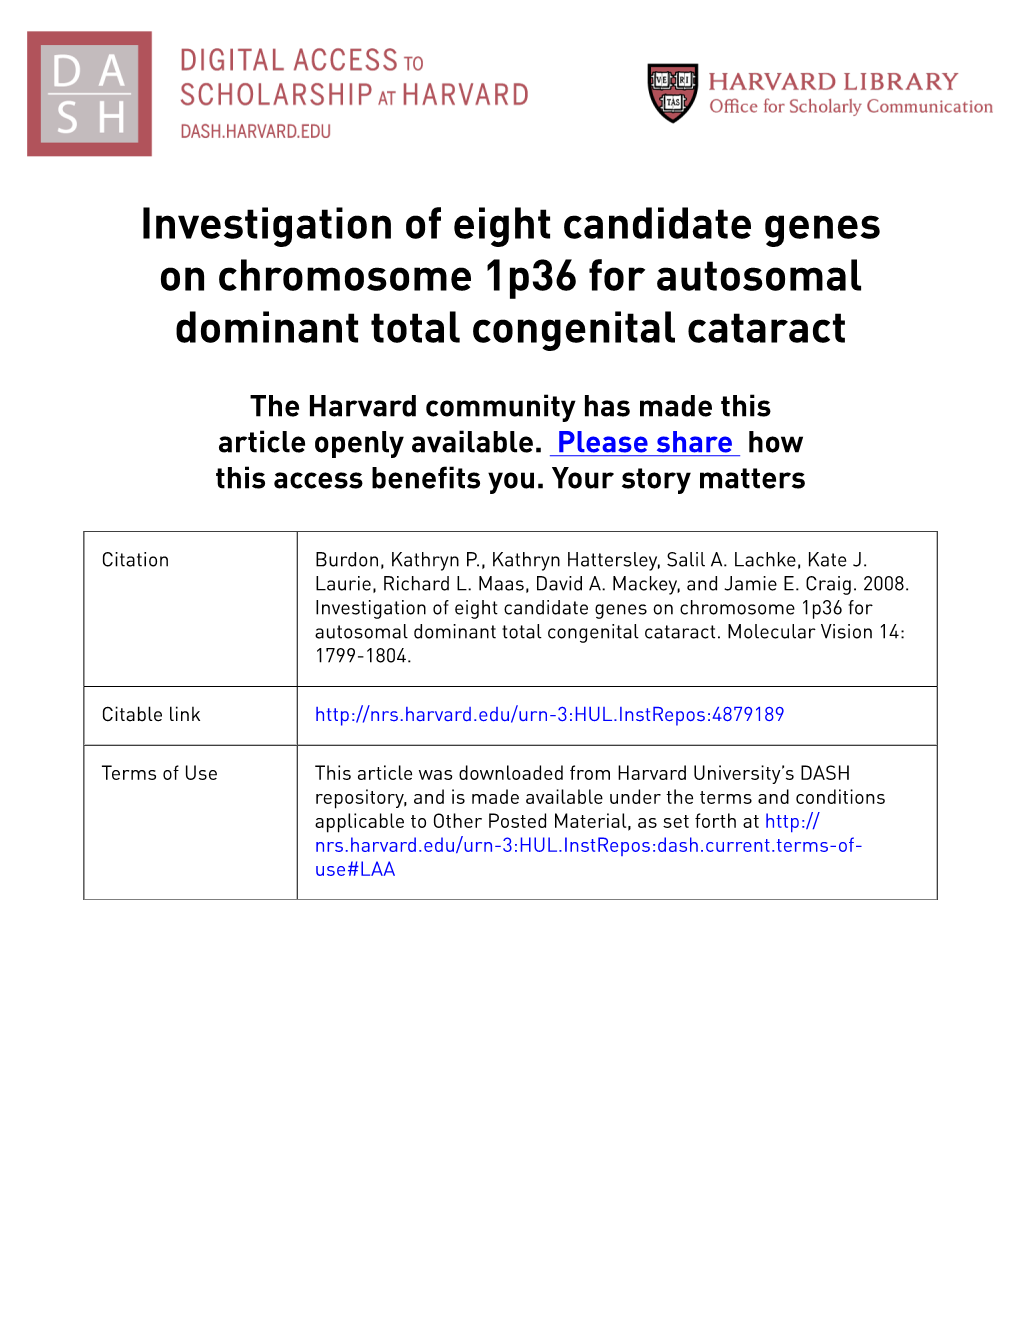 Investigation of Eight Candidate Genes on Chromosome 1P36 for Autosomal Dominant Total Congenital Cataract